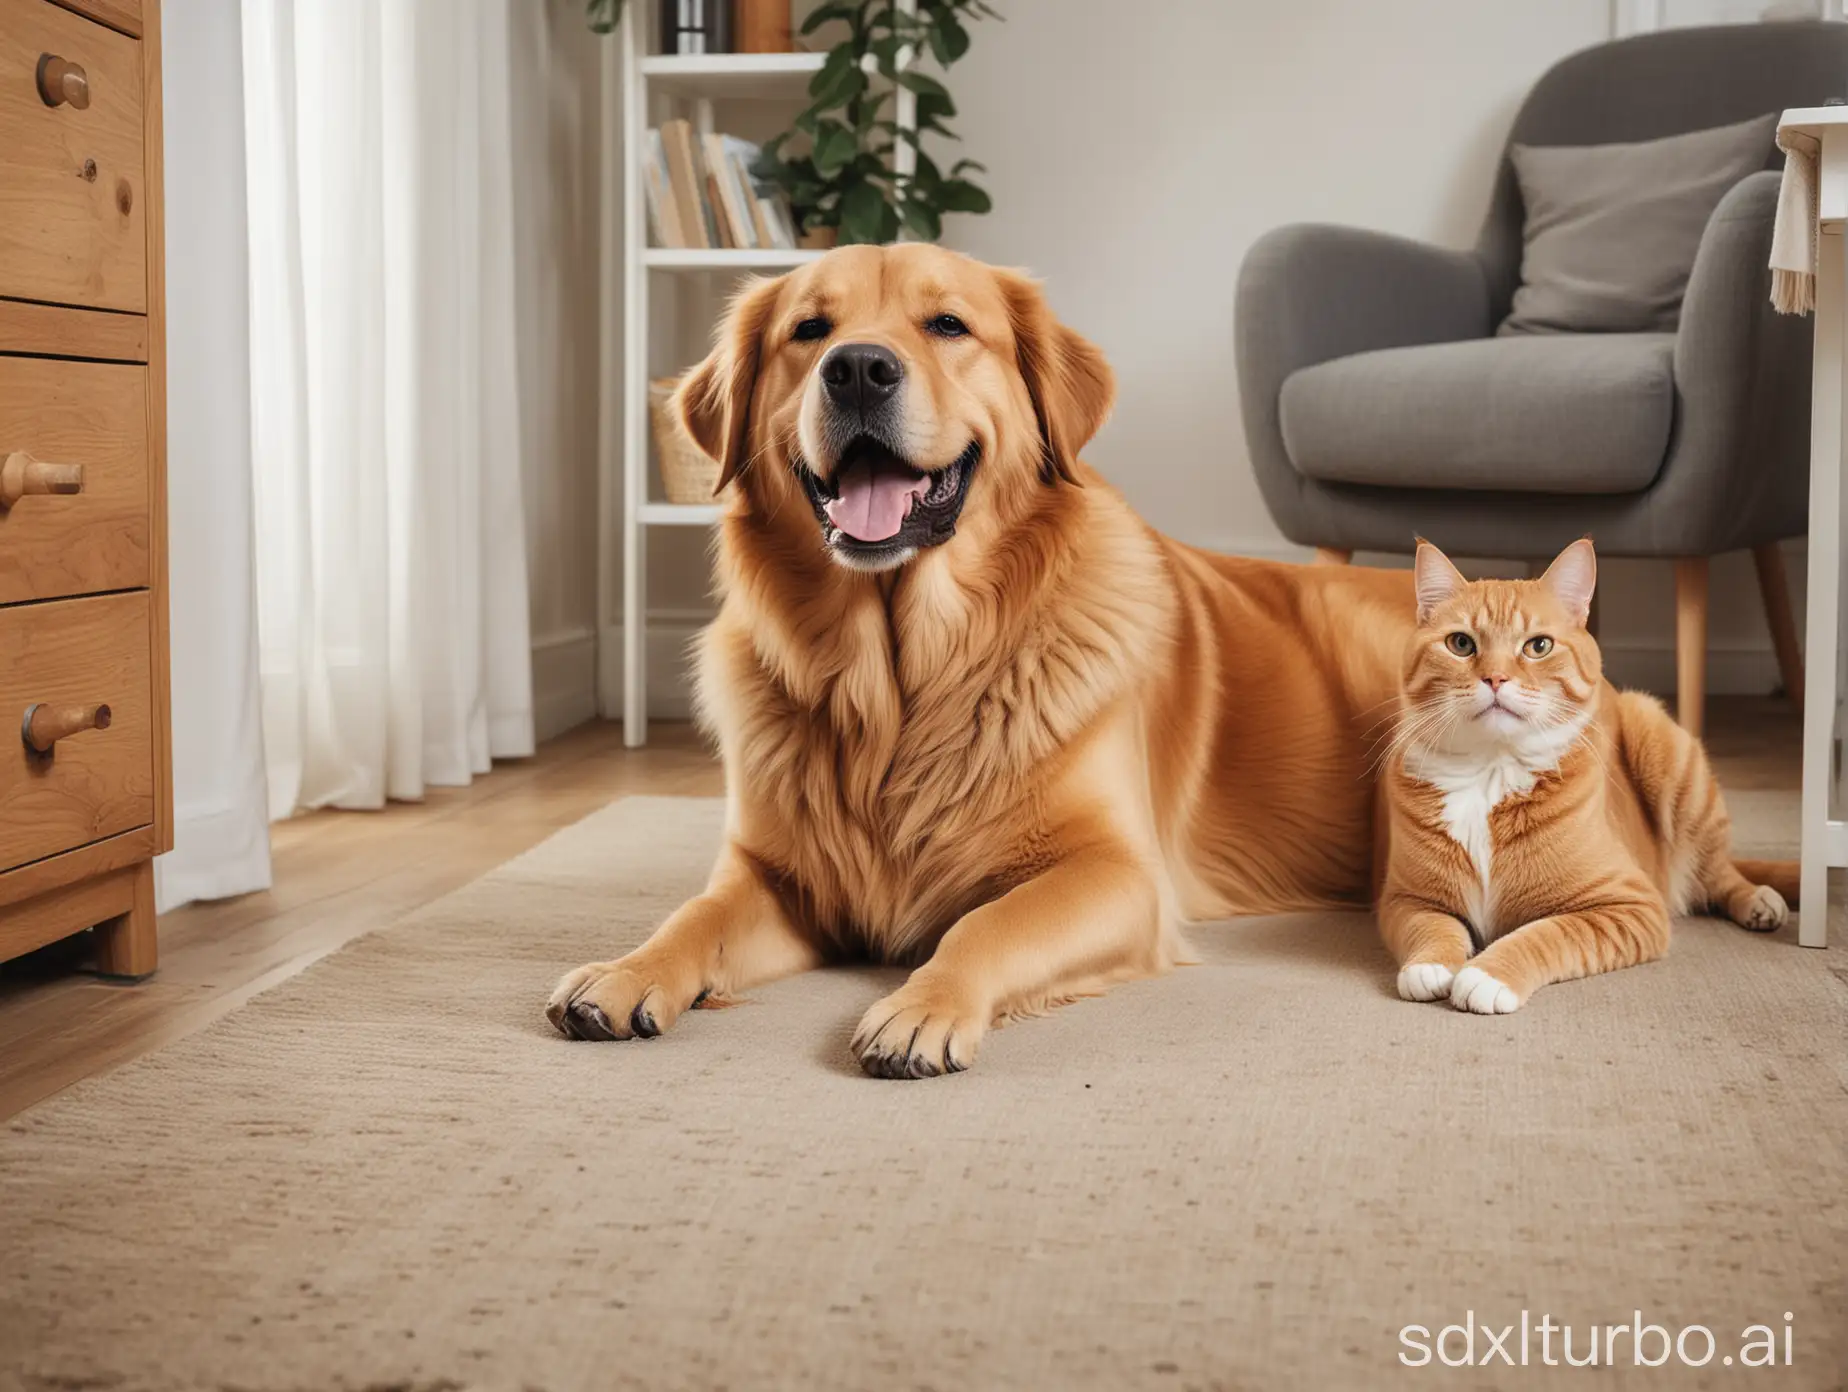 Joyful-Dog-and-Cat-Relaxing-Together-in-Cozy-Indoor-Setting